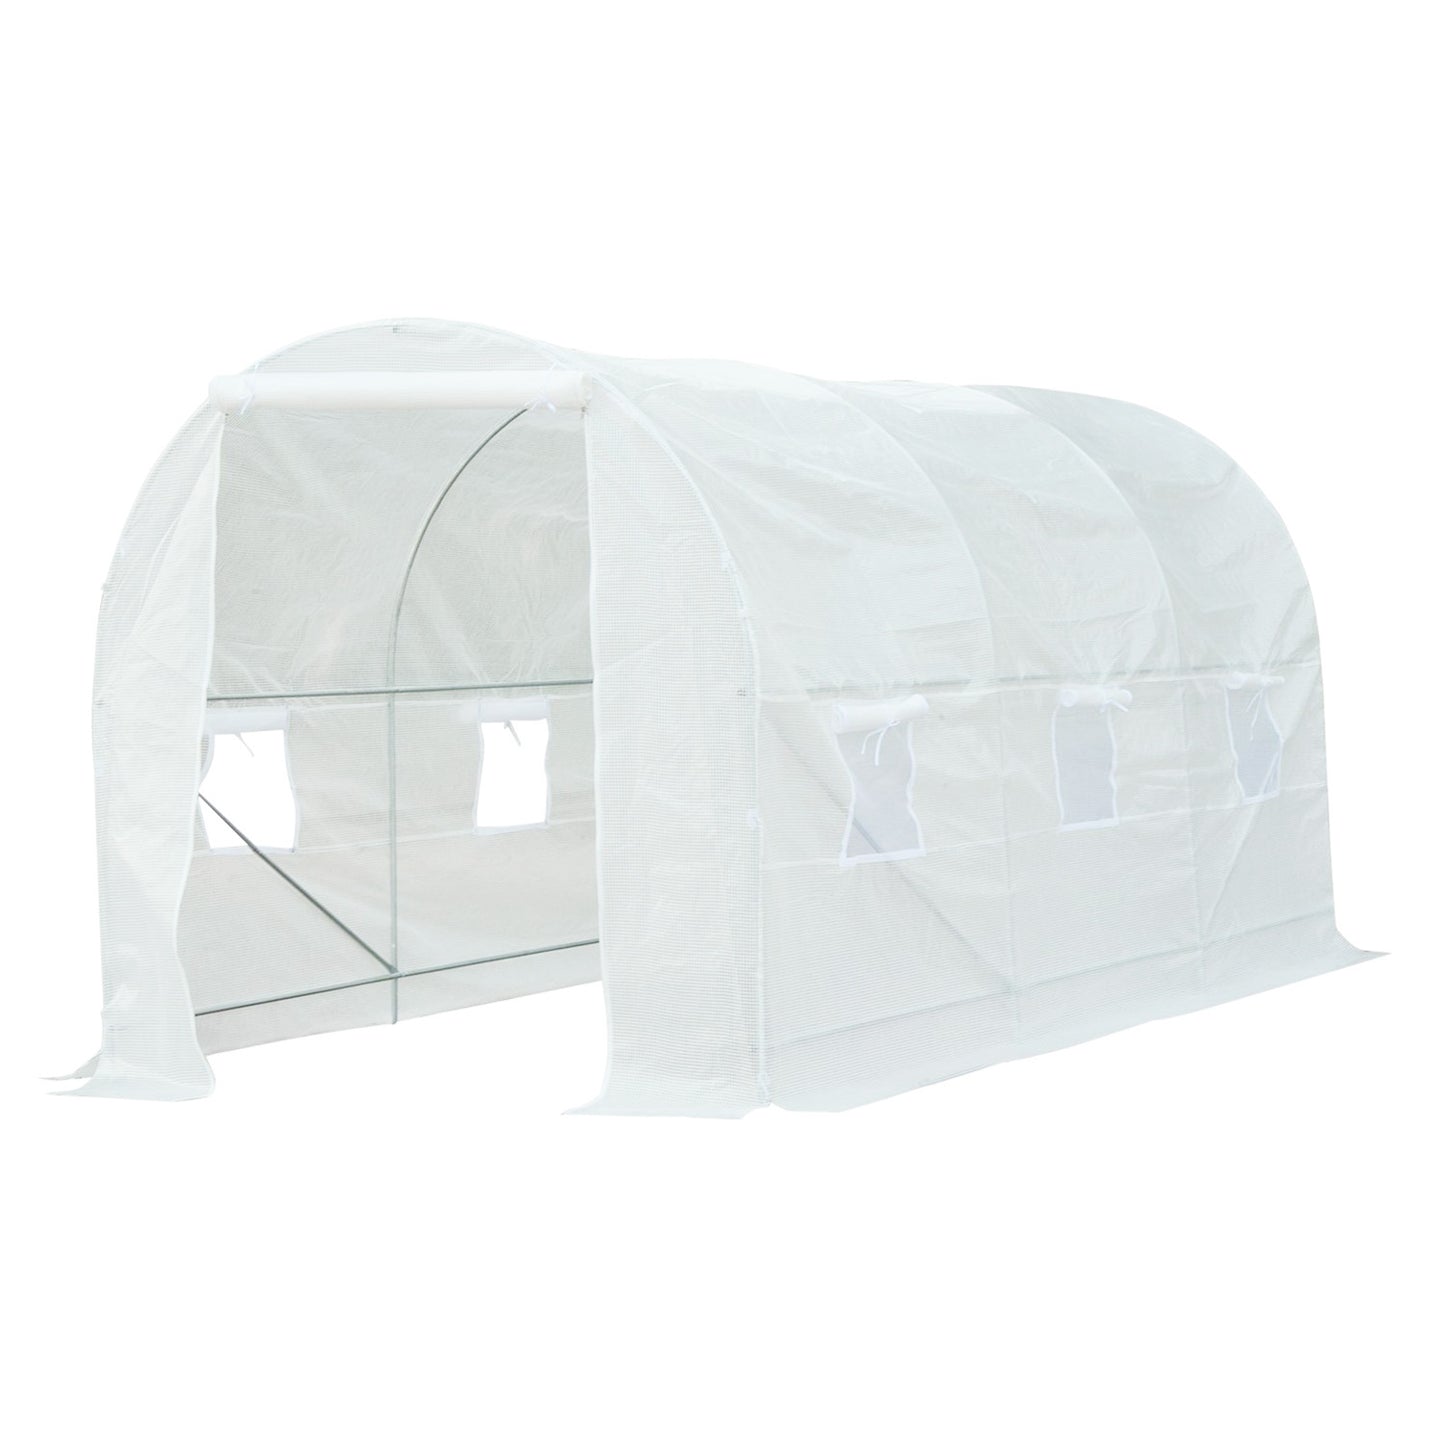 Outsunny 4.5Lx2Wx2H m Walk-in Greenhouse-White